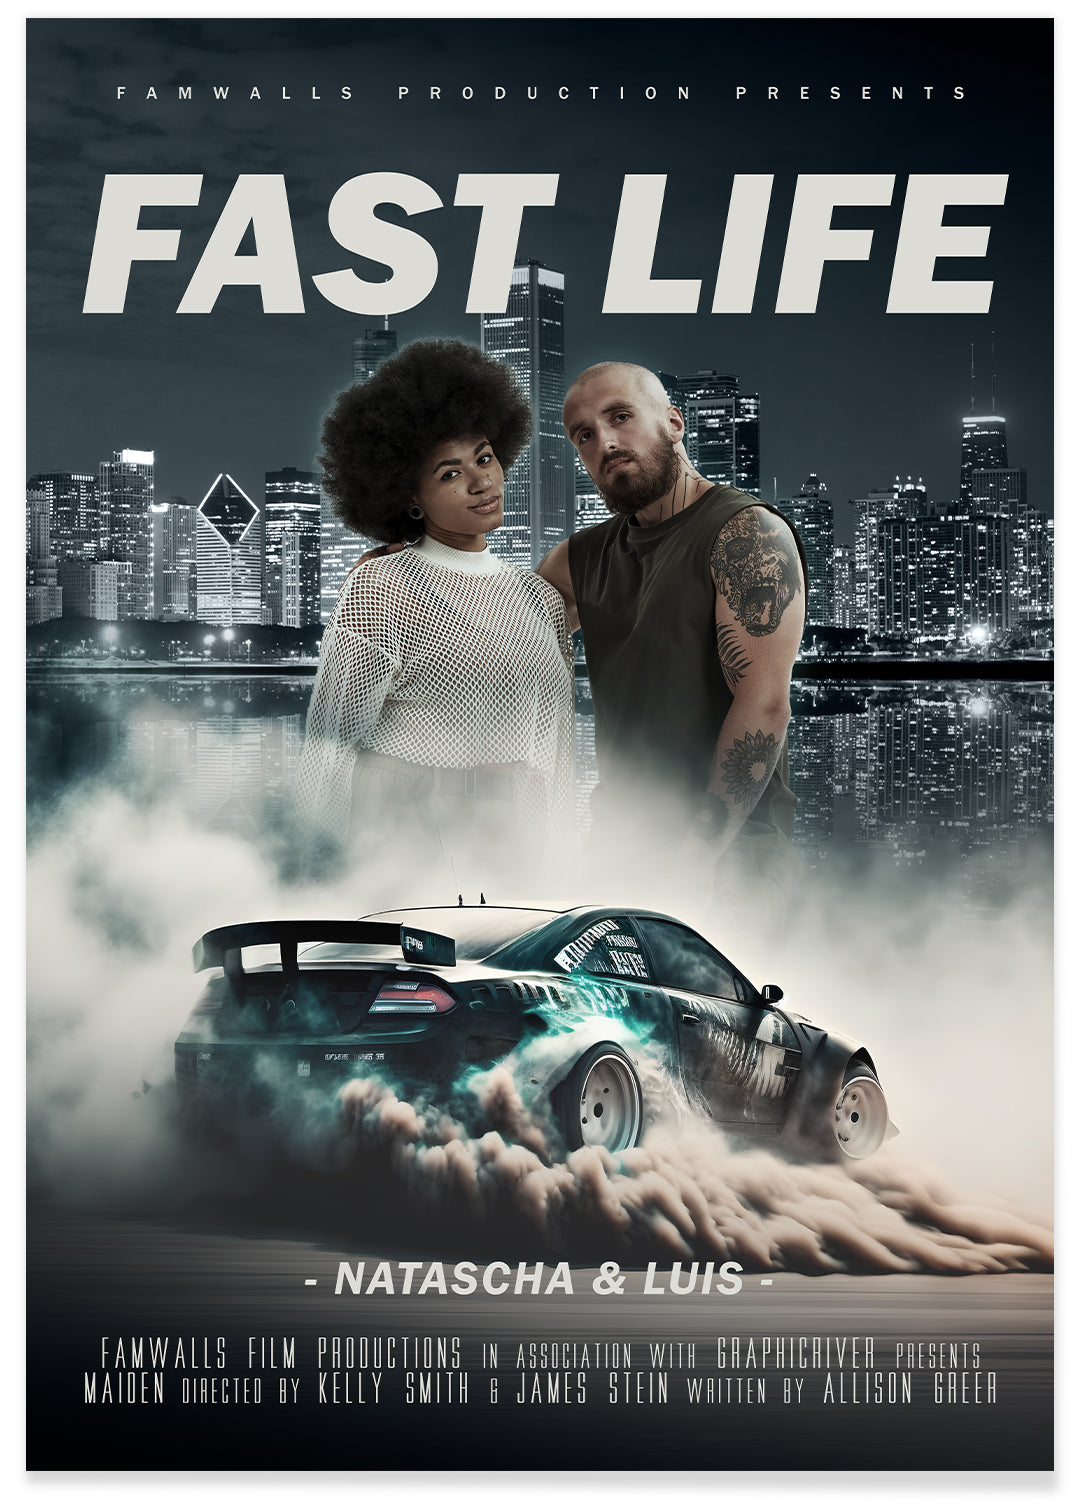 Movie poster "Fast Life"